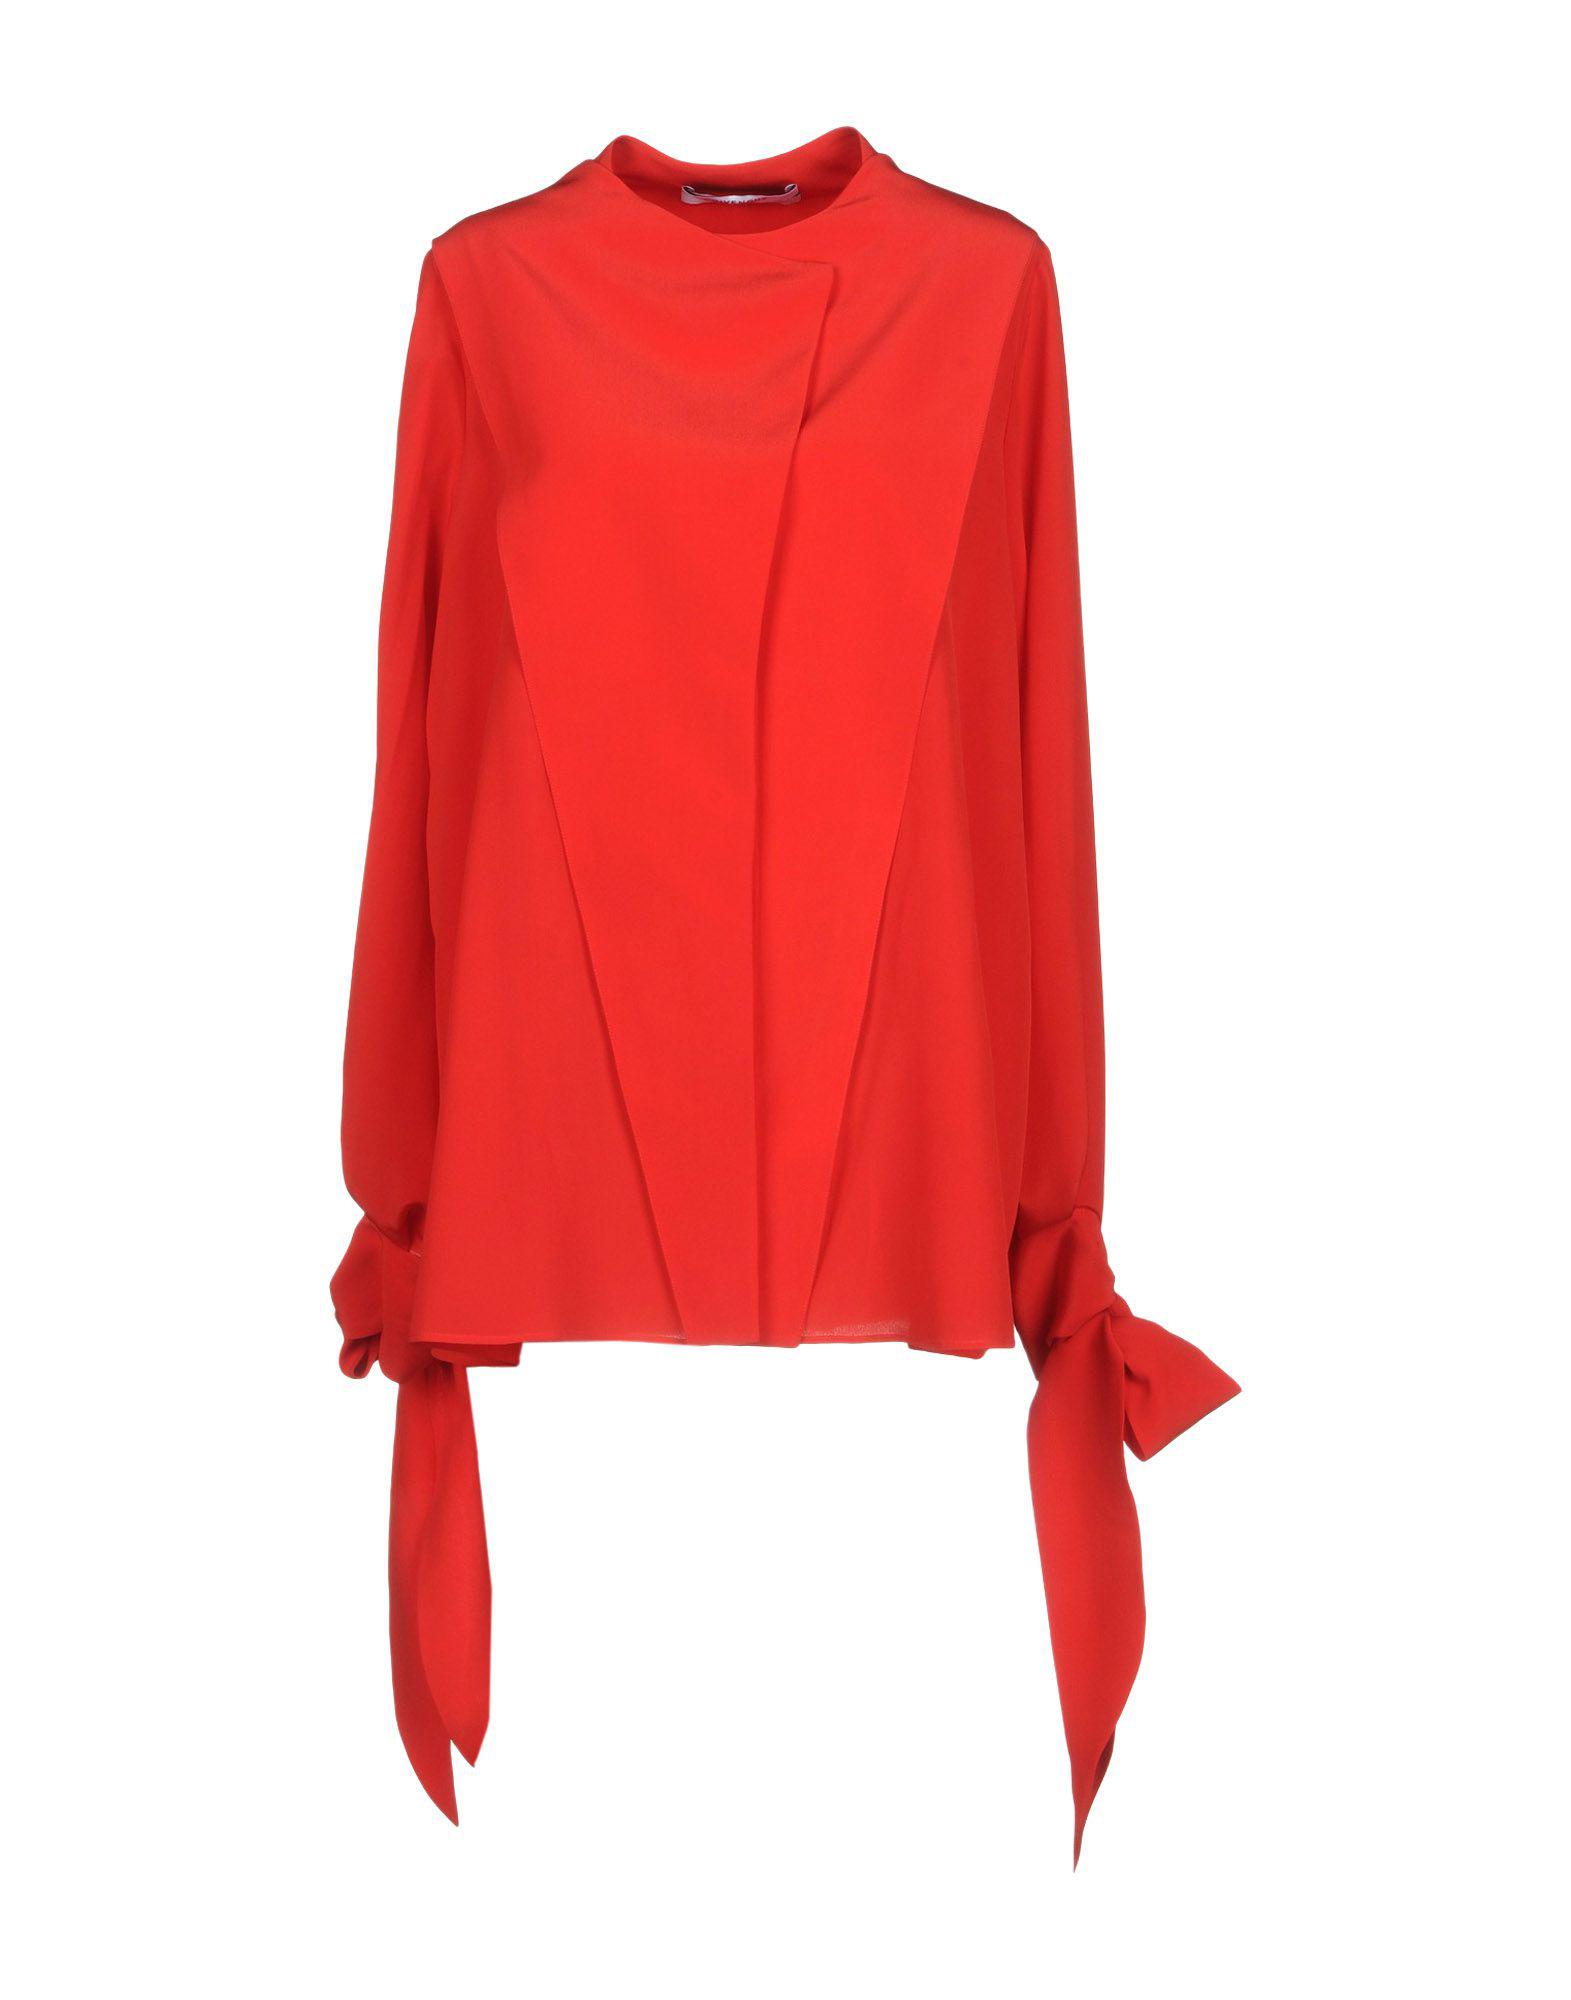 Givenchy Silk Shirt in Red - Save 20% - Lyst